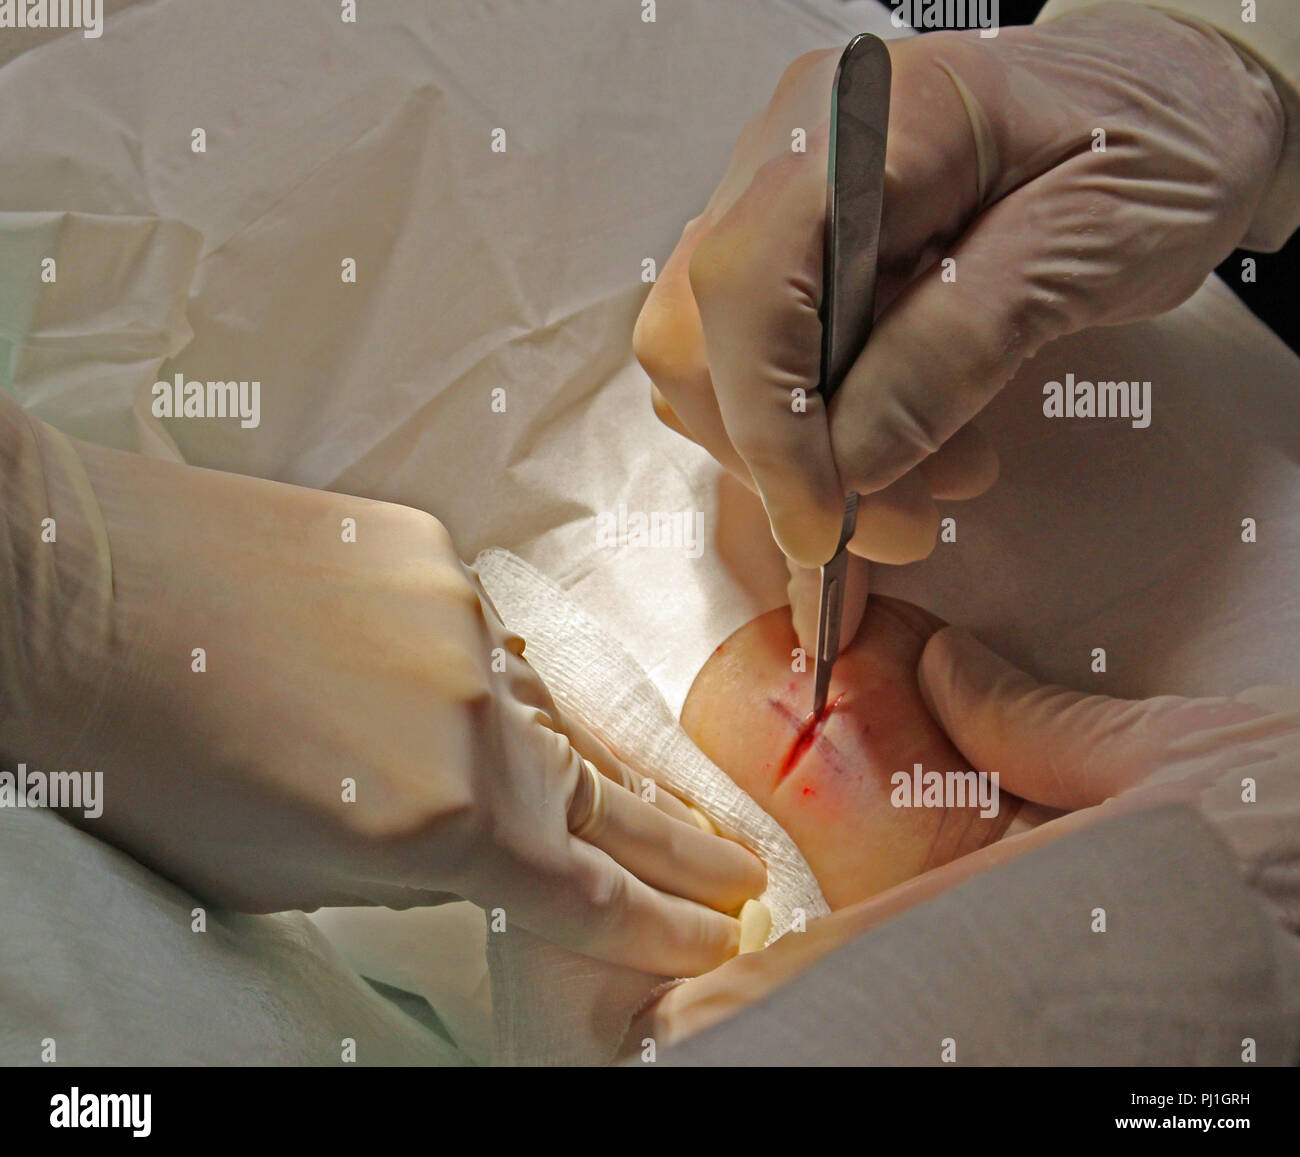 Making a surgical incision Stock Photo